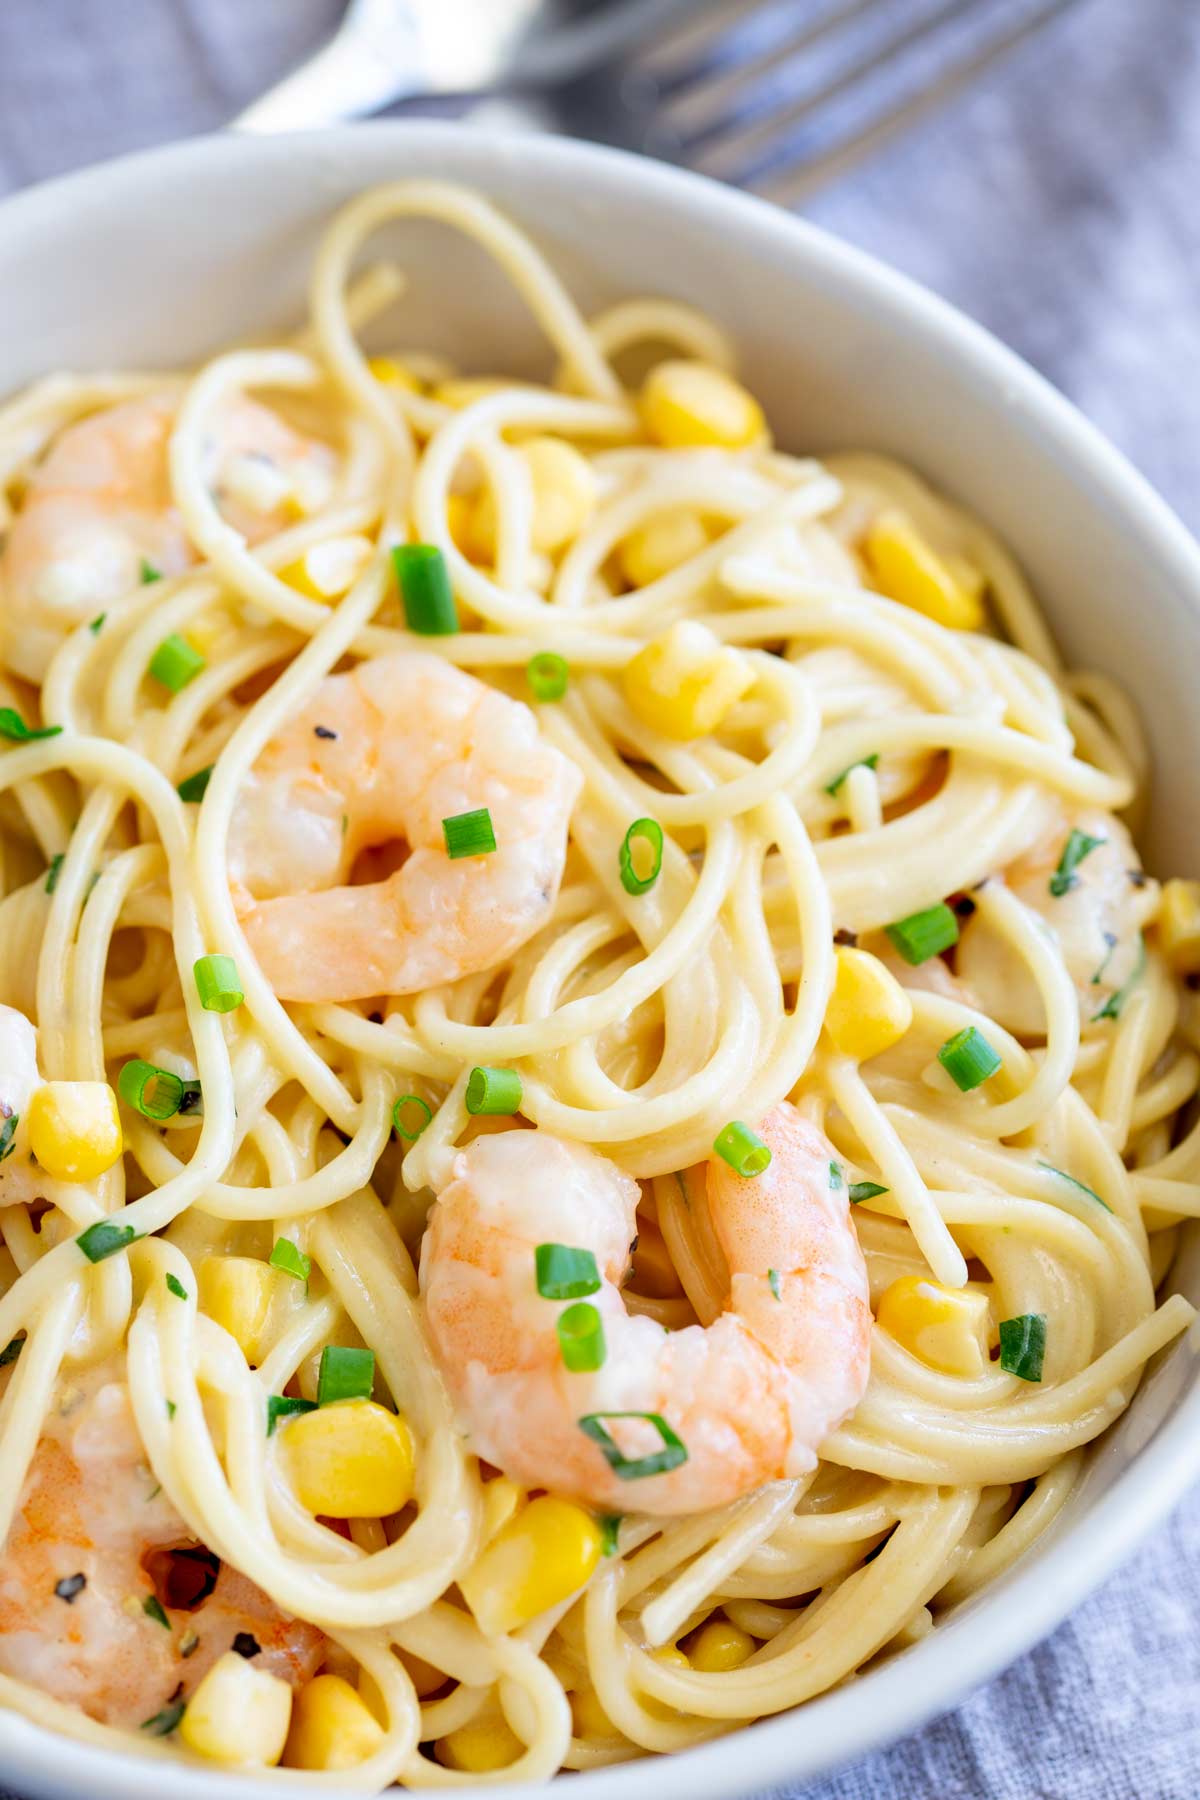 corn and shrimp pasta garnished with chives in a white bowl